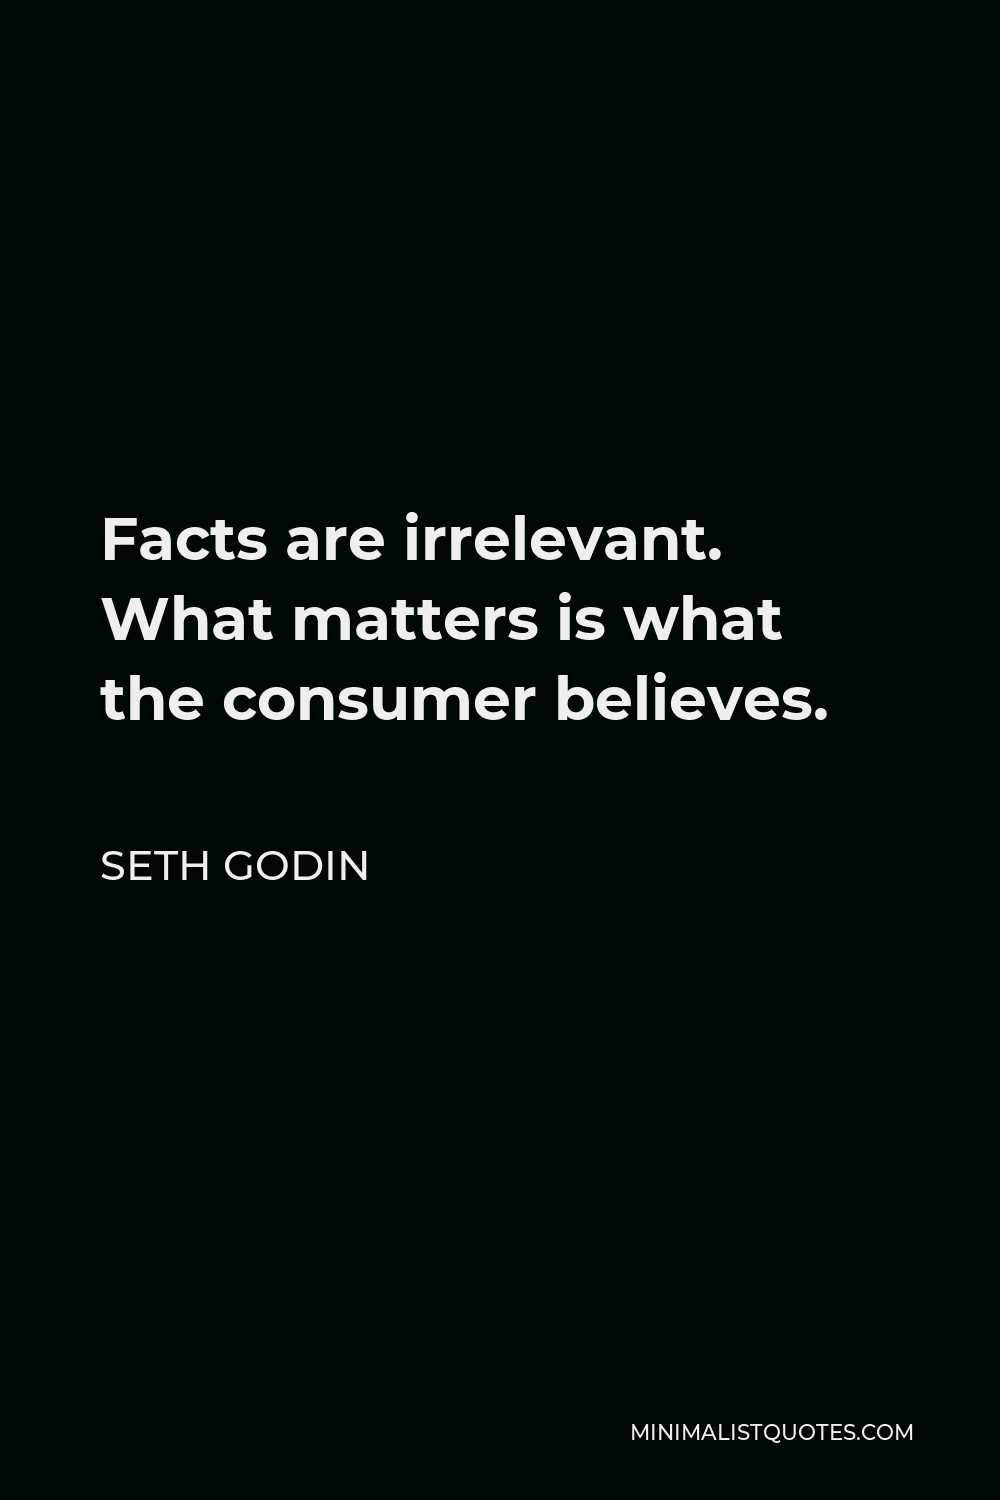 Seth Godin Quote - Facts are irrelevant. What matters is what the consumer believes.